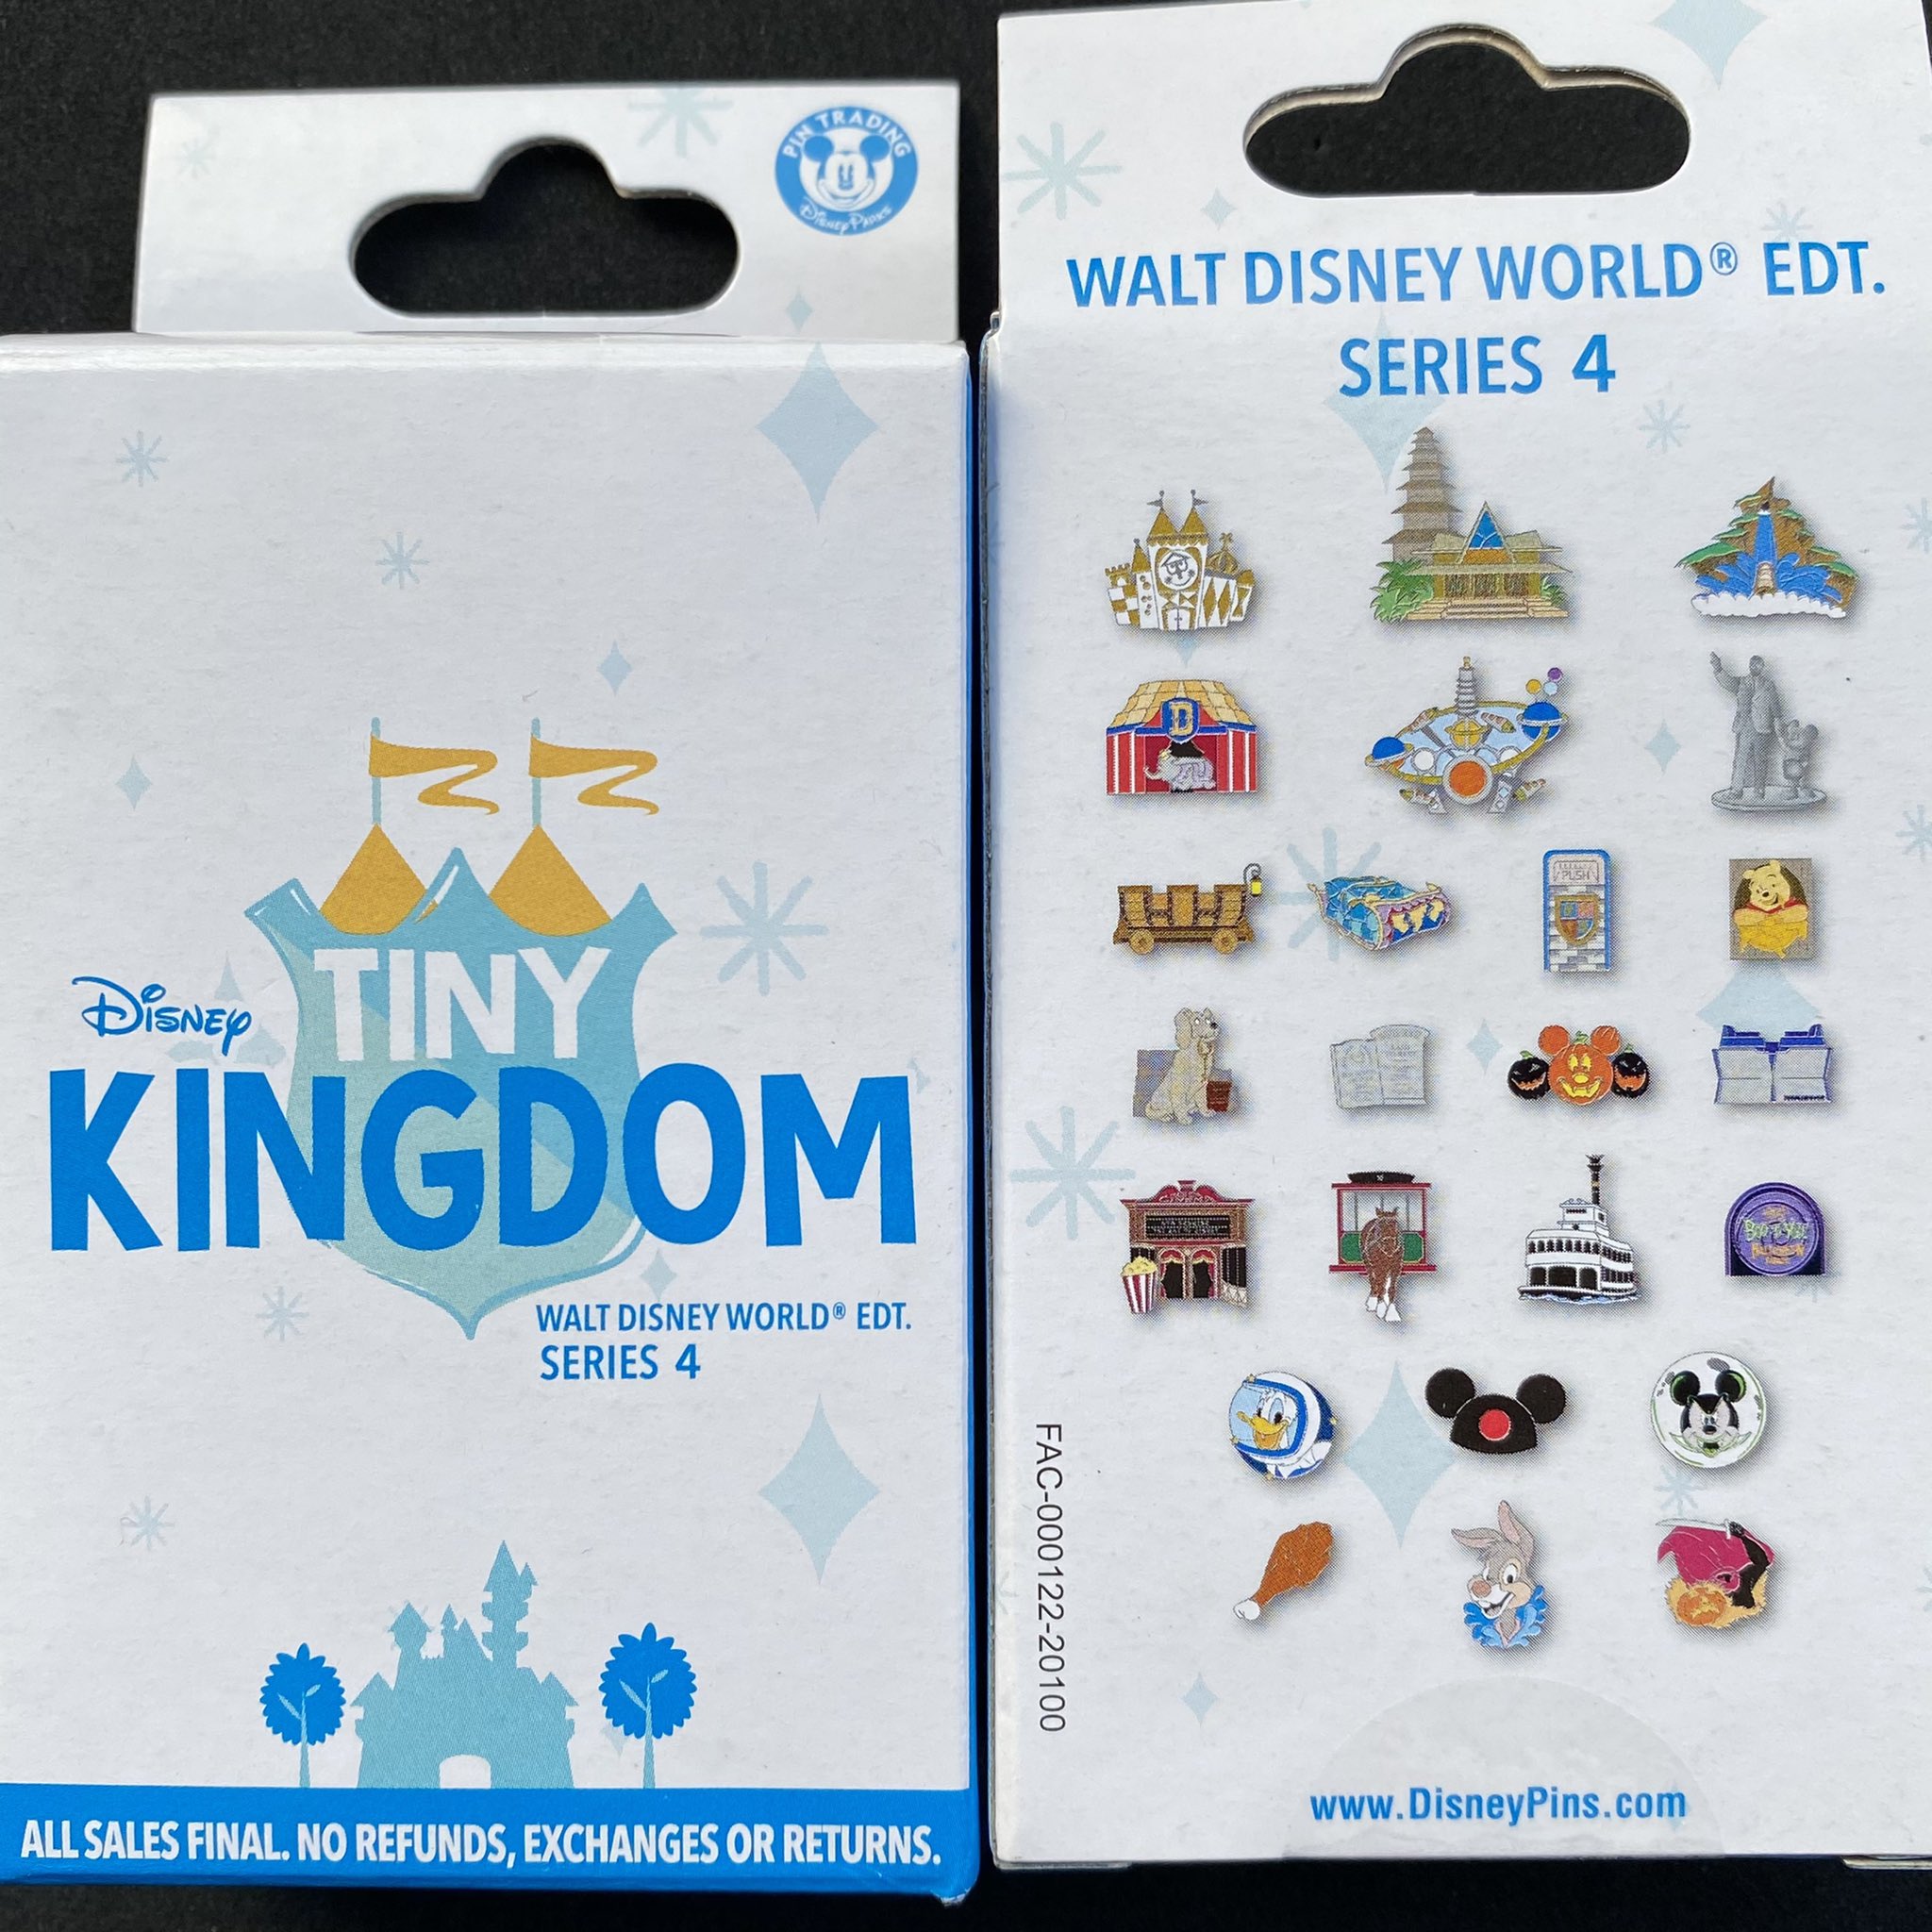 Disney Tiny Kingdom WDW 2nd Edition Belle Portrait Beauty and the Beast LR Pin